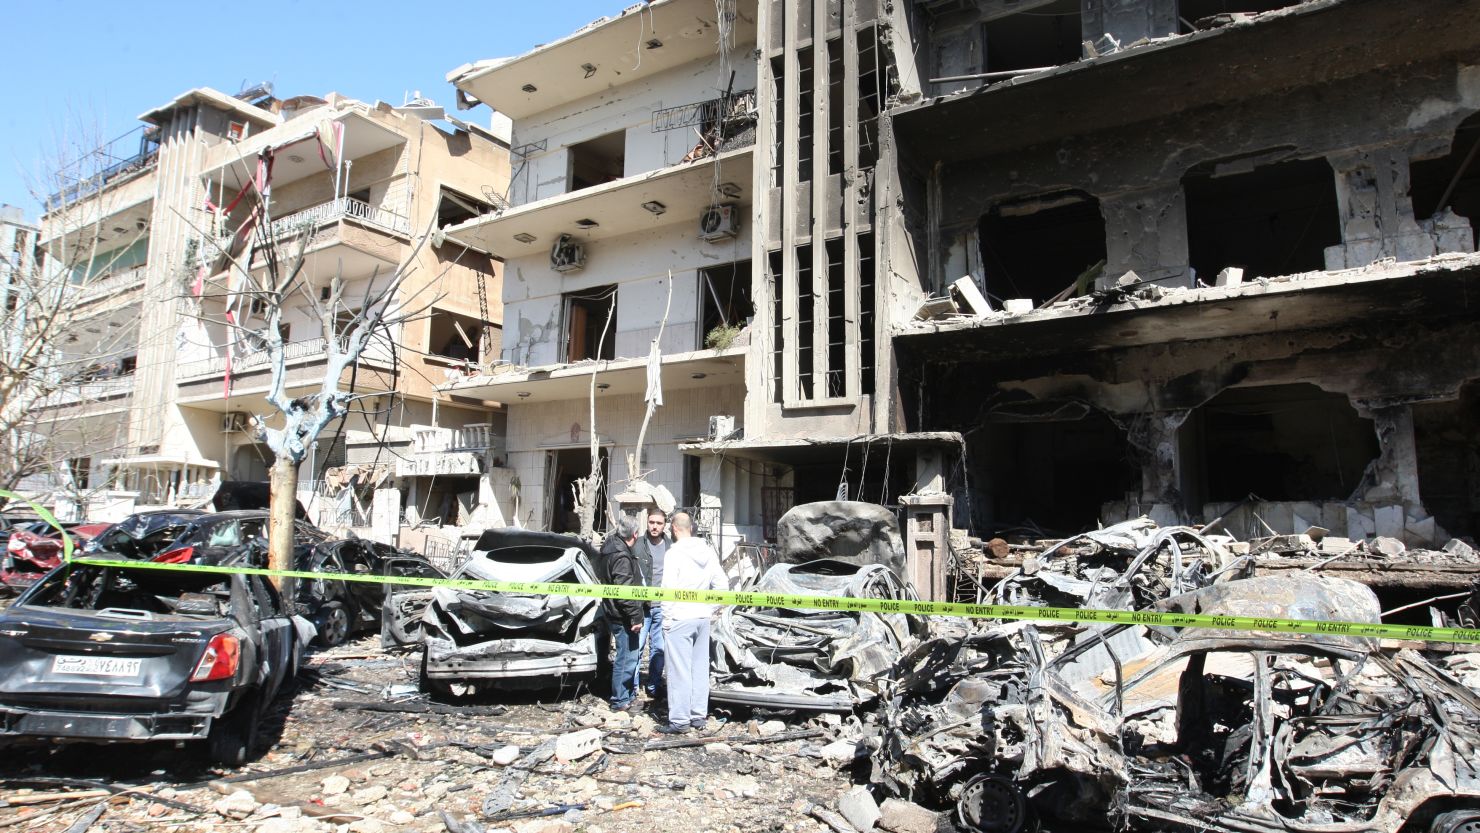 Syrian security officers inspects the scene at a destroyed building following twin bomb attacks in Damascus on Saturday.